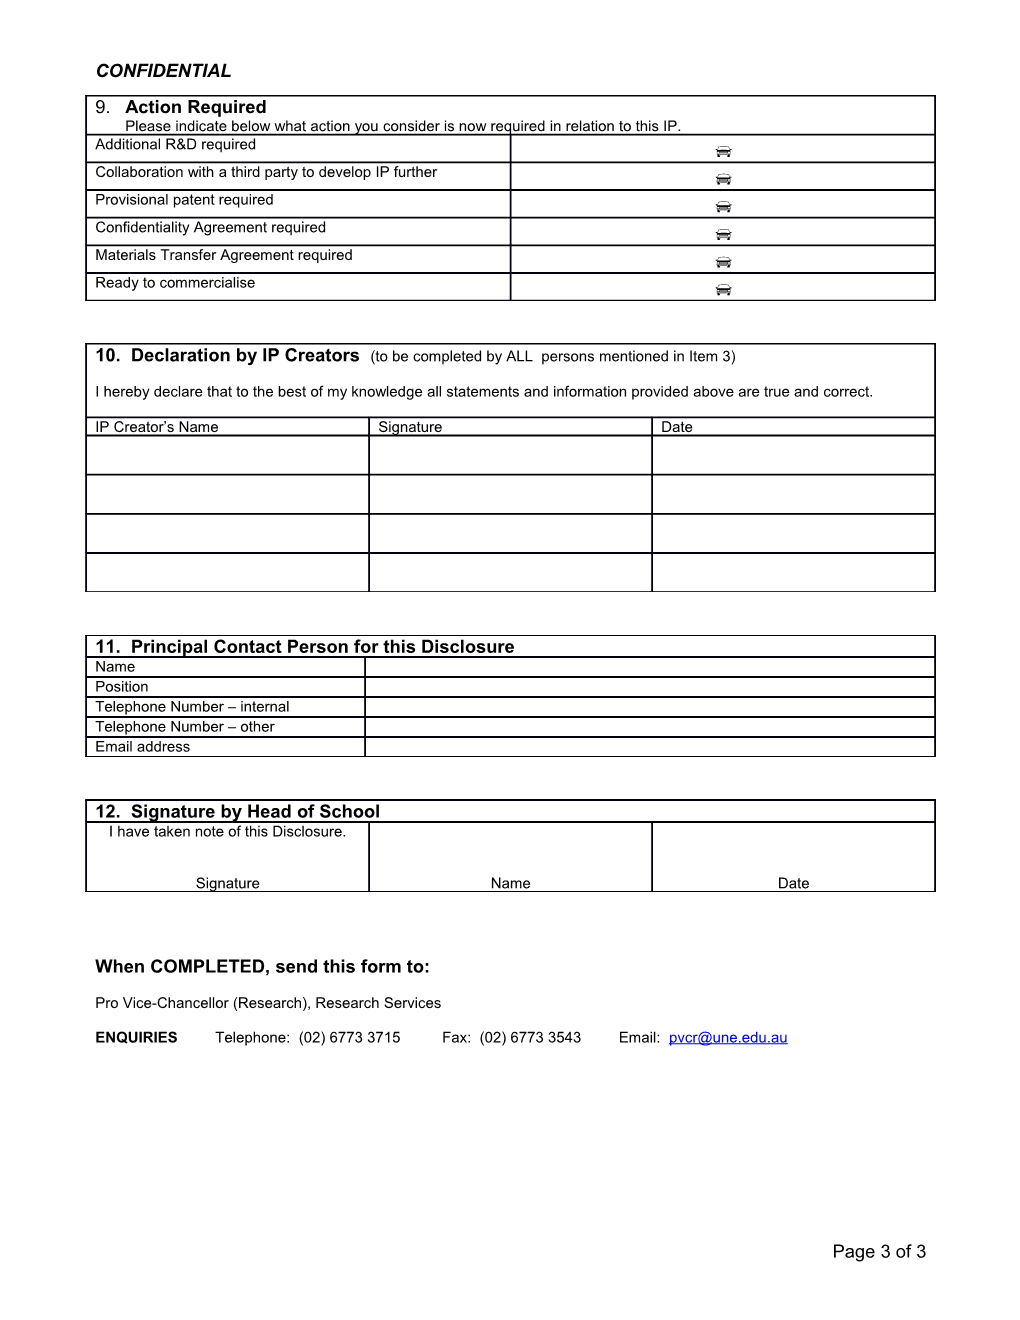 Who Should Use This Form